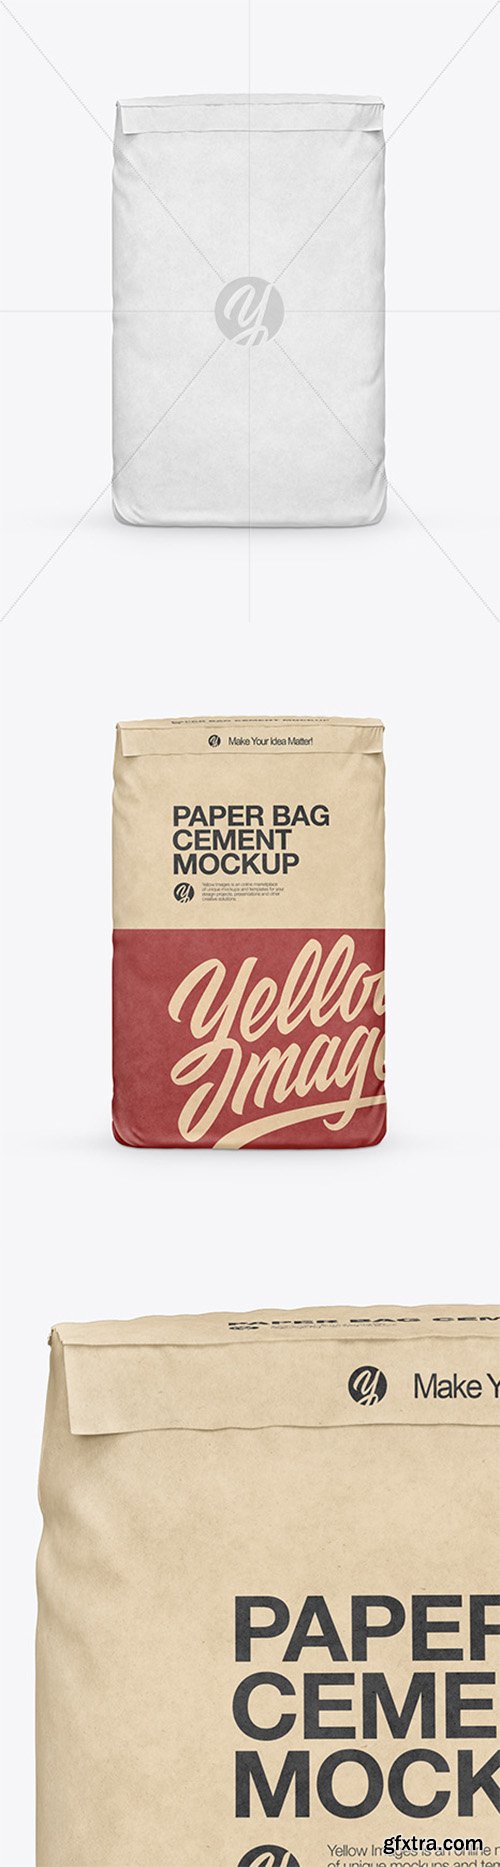 Download 11 2 Kg Kraft Paper Bag Front View Yellowimages Yellowimages Mockups